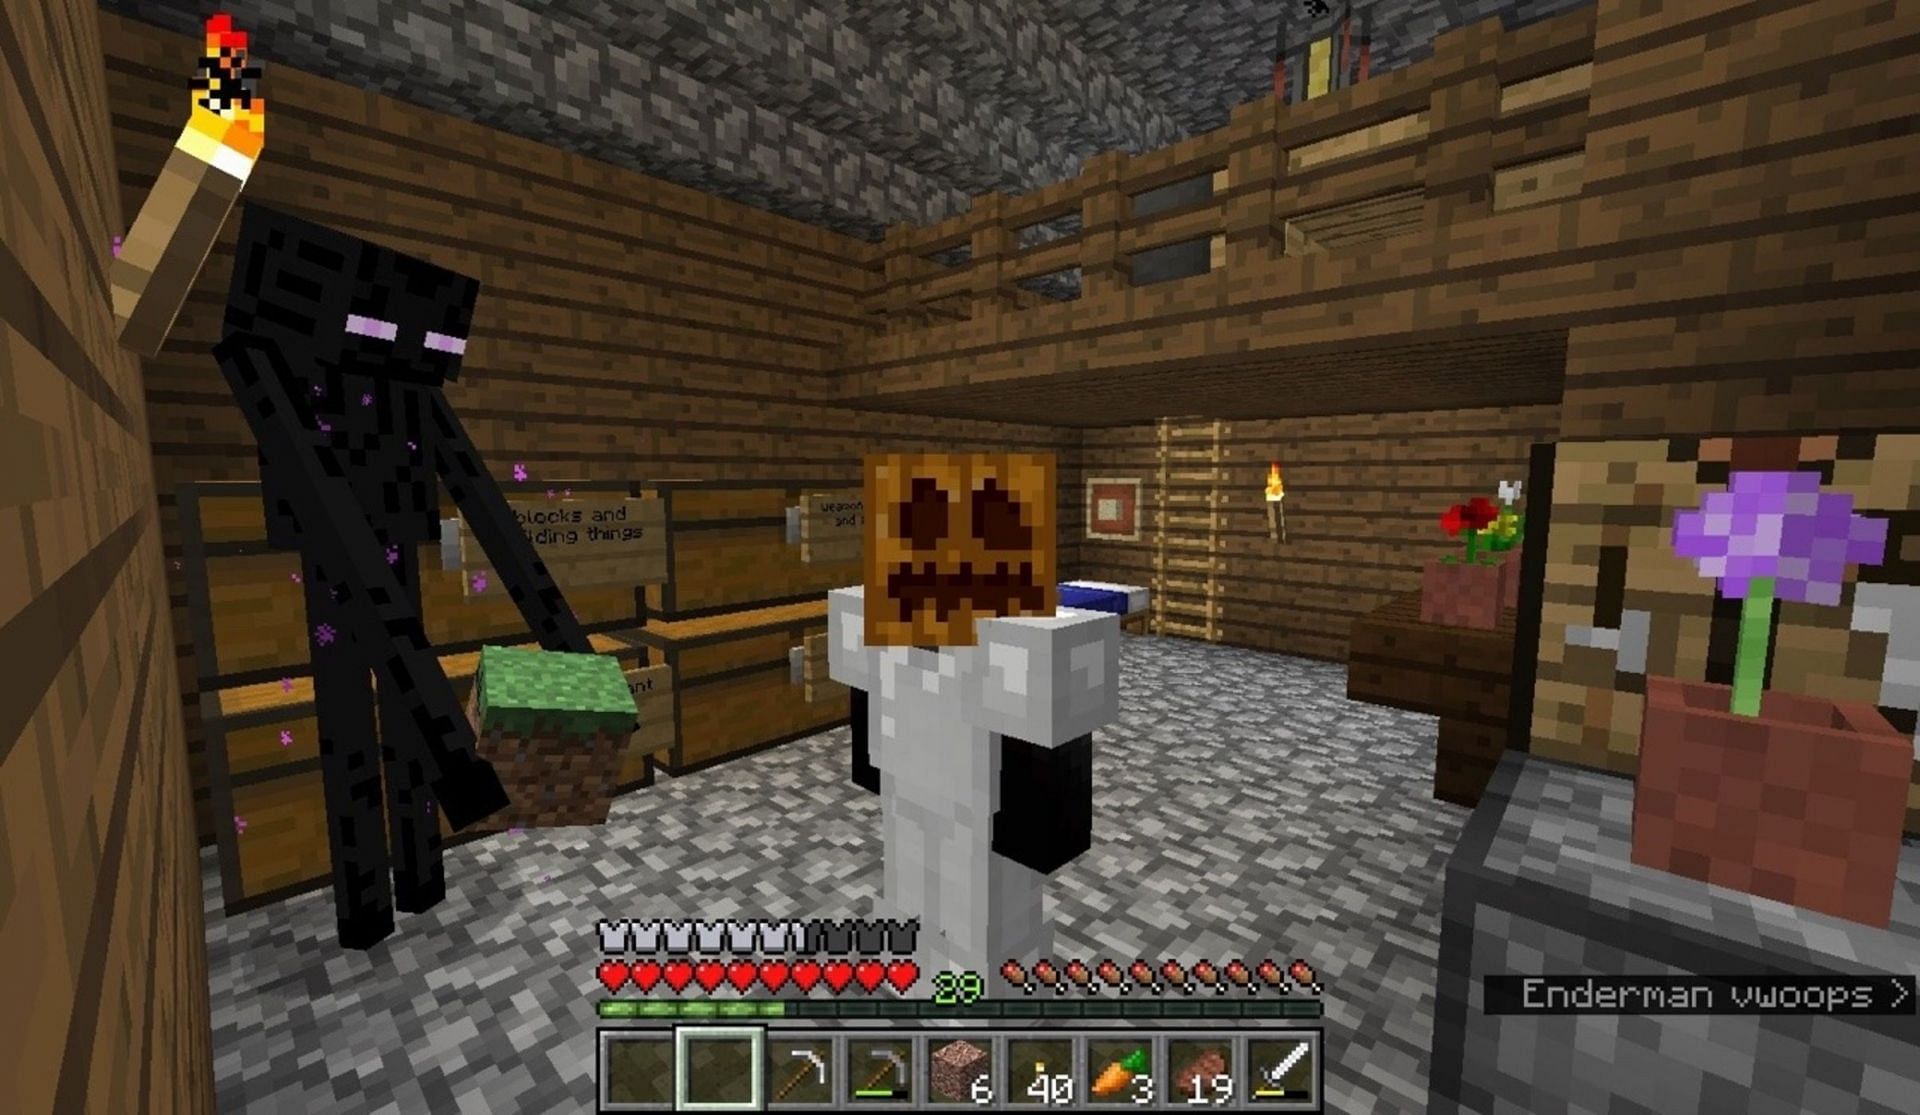 Carved pumpkins can partially pacify endermen (Image via Gay-slime/tumblr)